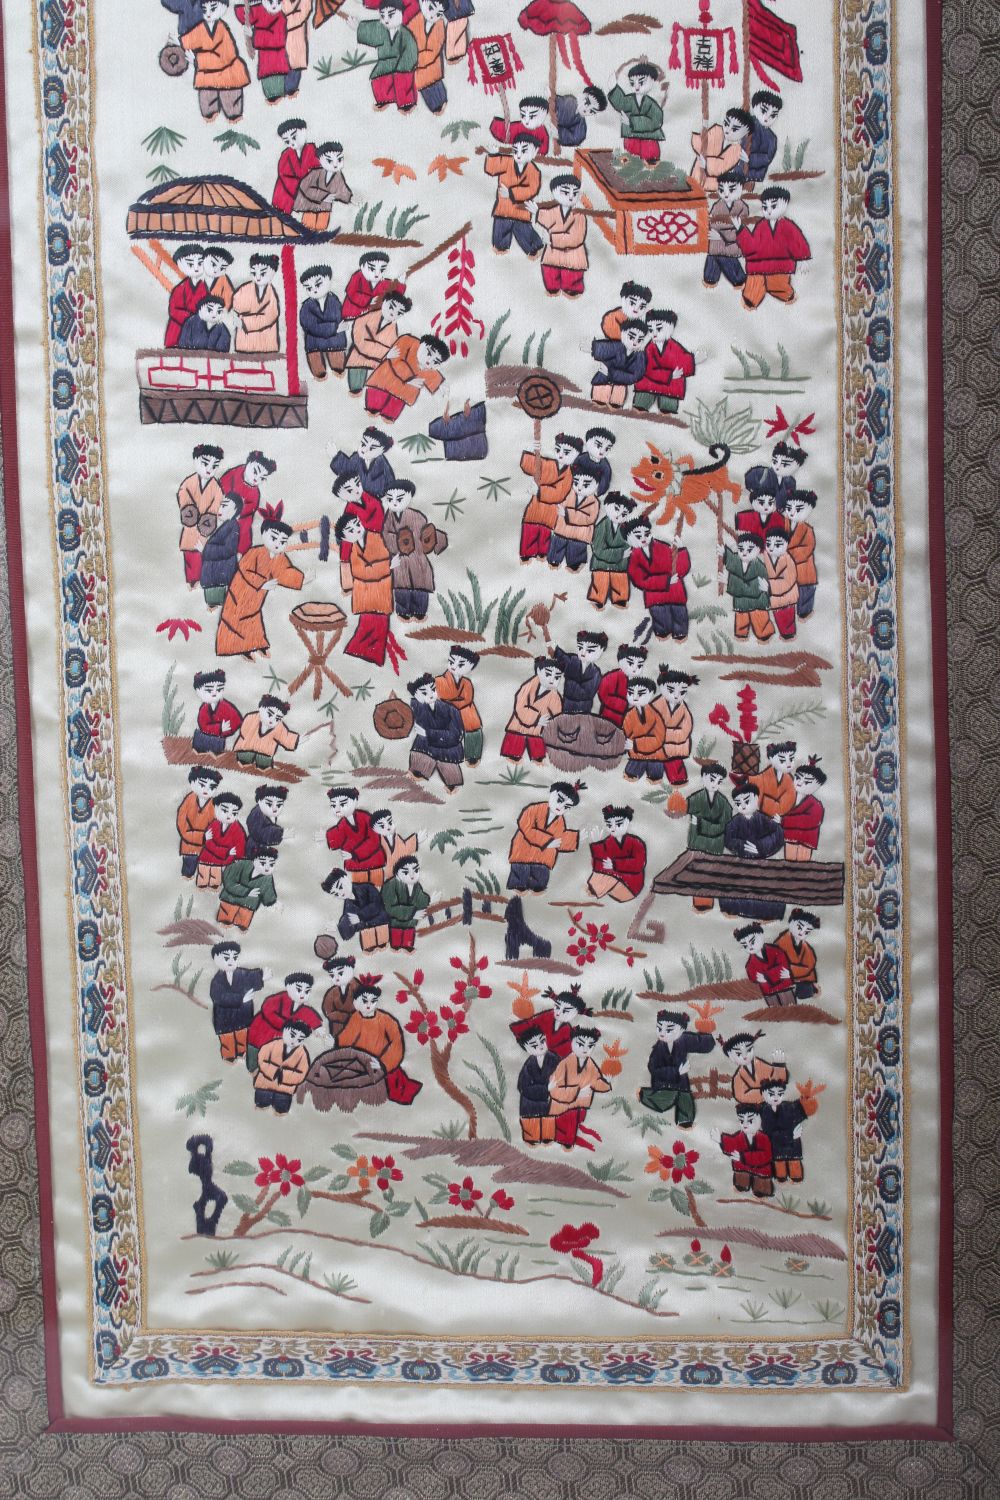 A LATE 19TH / EARLY 20TH CENTURY CHINESE EMBROIDERED SILK OF BOYS, the framed silk work depicting - Image 5 of 7